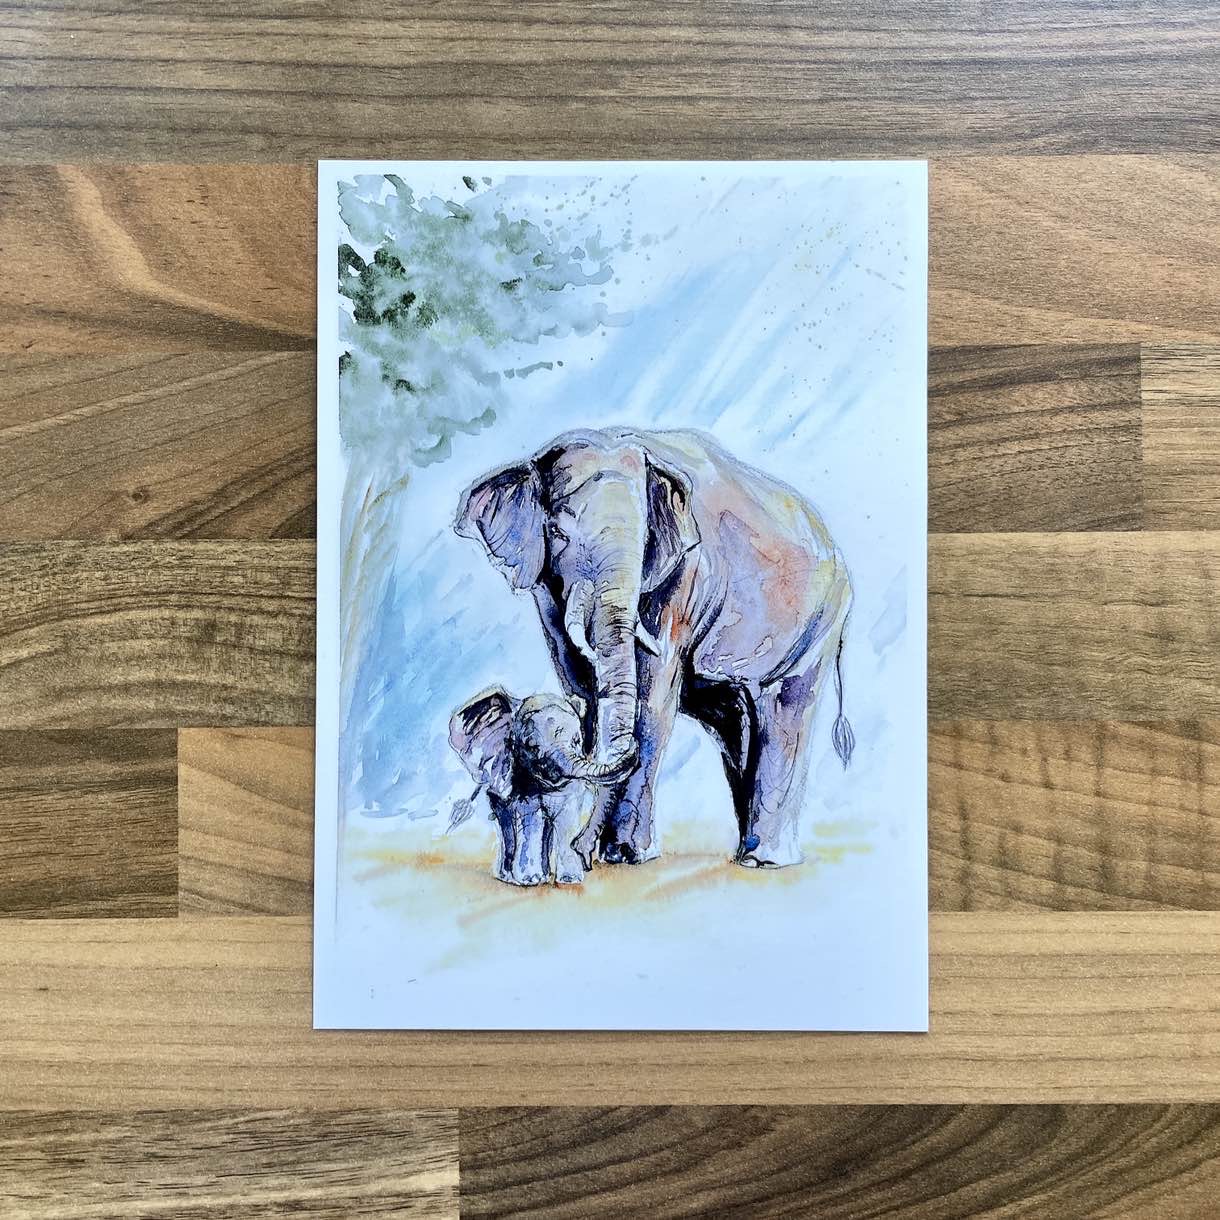 Watercolour painting of a mother elephant with a small baby holding their trunk